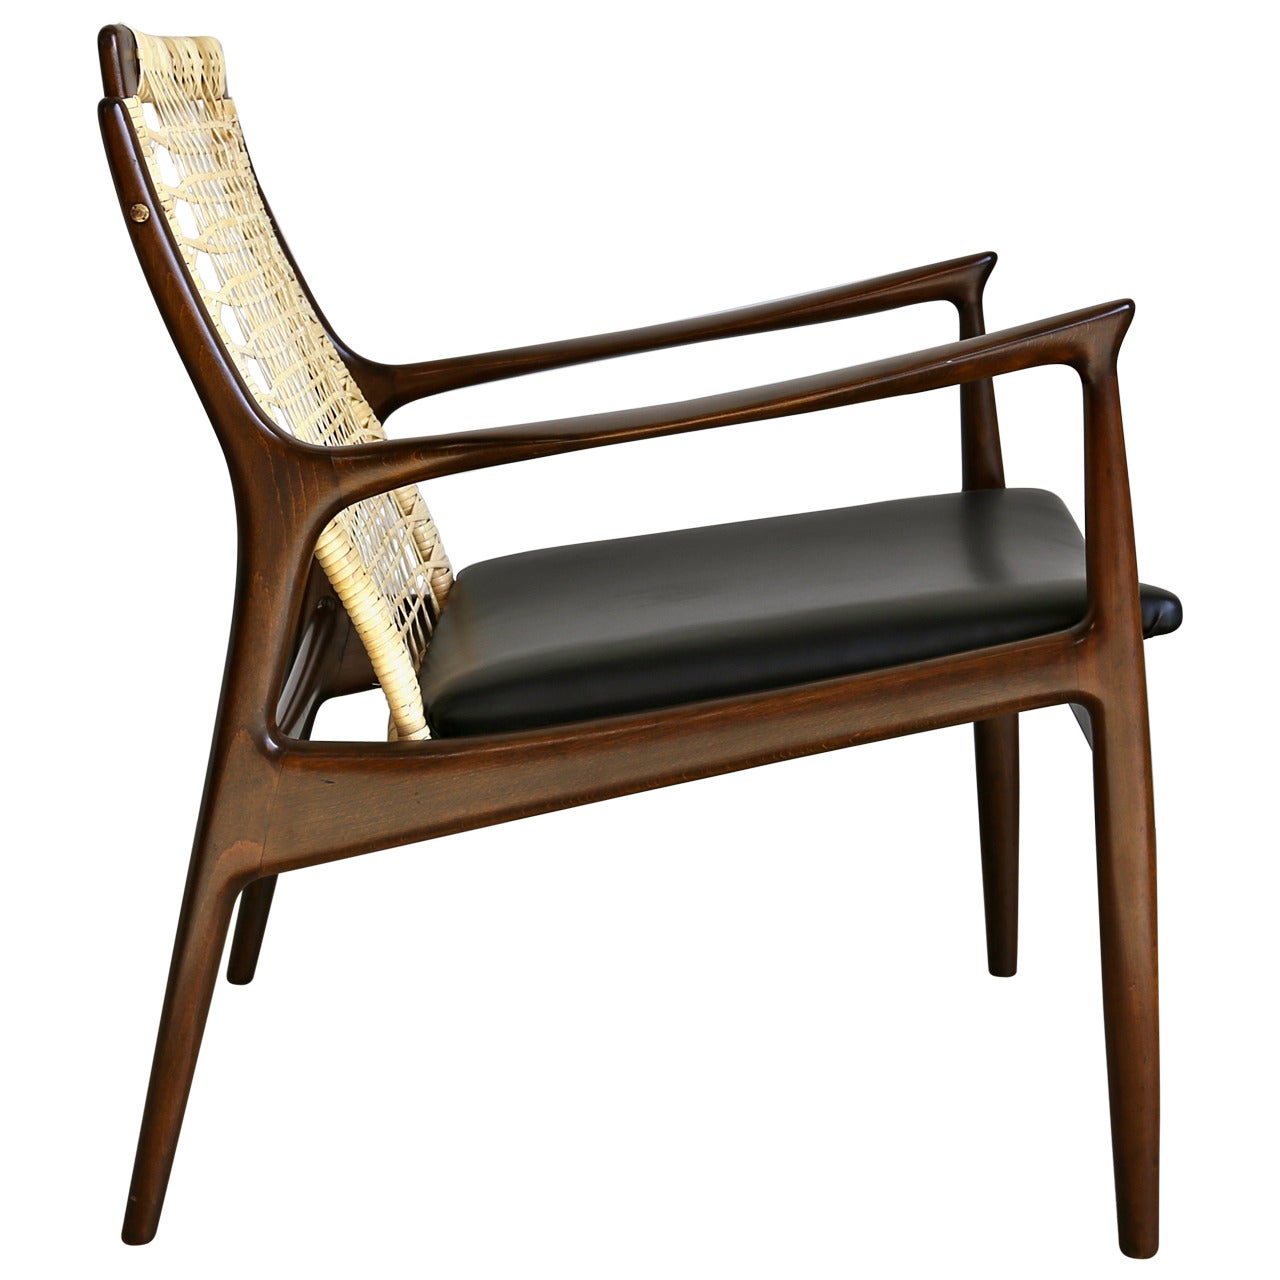 Caned Lounge Chair by Ib Kofod Larsen for Selig of Denmark